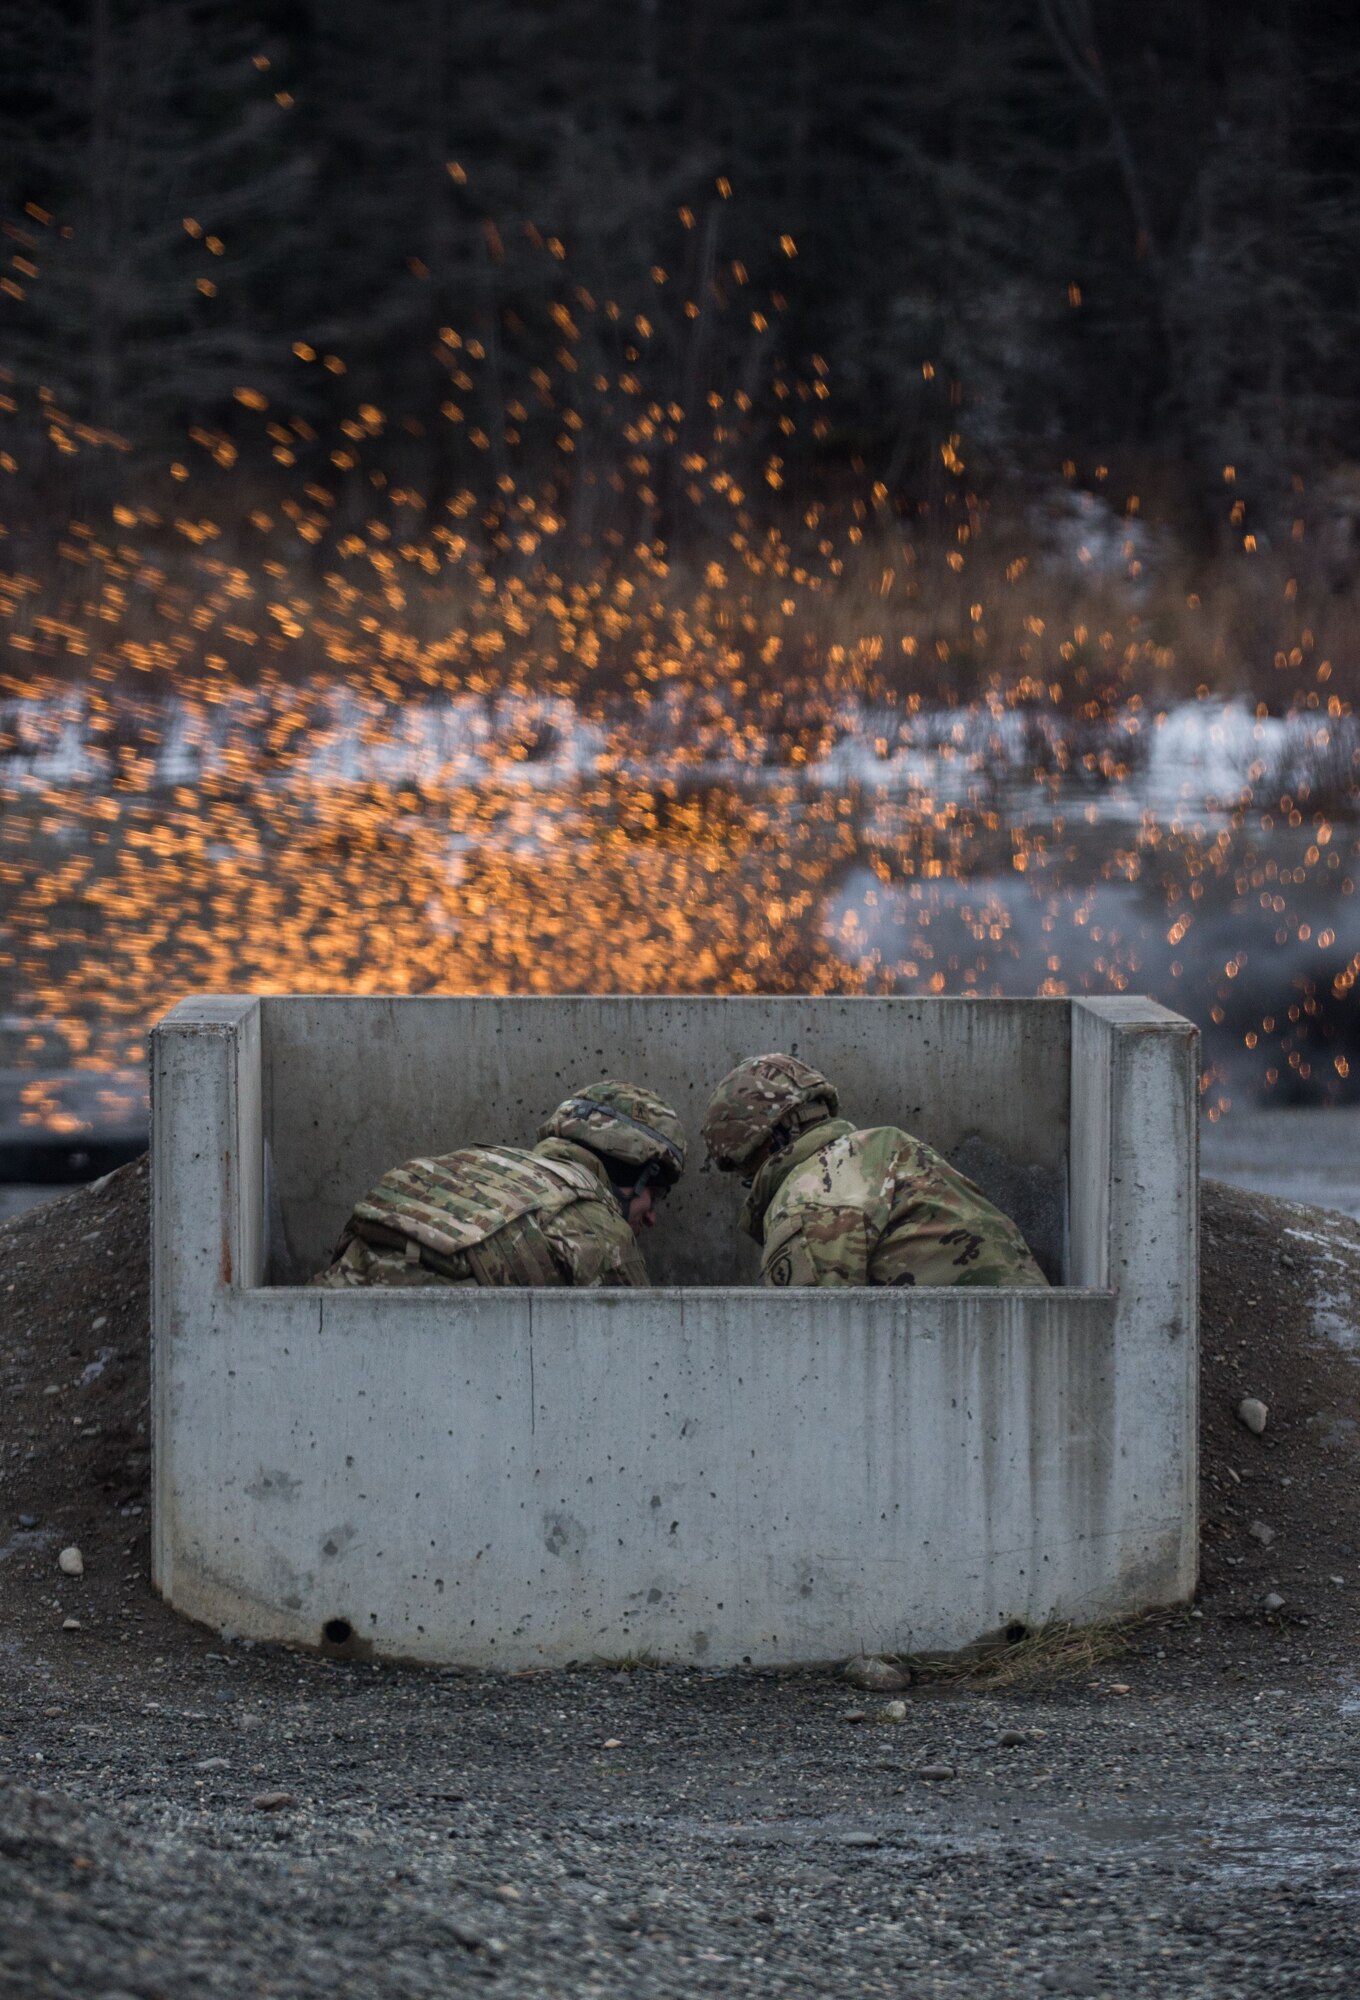 Paratroopers assigned to 3rd Battalion, 509th Parachute Infantry Regiment, 4th Infantry Brigade Combat Team (Airborne), 25th Infantry Division, U.S. Army Alaska, take cover while conducting M67 fragmentation grenade live fire training at Kraft Range on Joint Base Elmendorf-Richardson, Alaska, Dec. 12, 2017. A ‘pit’ noncommissioned officer supervised the Soldiers throwing grenades to maintain a safe instructional environment, enforce precaution standards, and direct them on proper handling of explosives. The fragmentation hand grenade has a lethal radius of five meters and can produce casualties up to 15 meters, dispersing fragments as far as 230 meters.